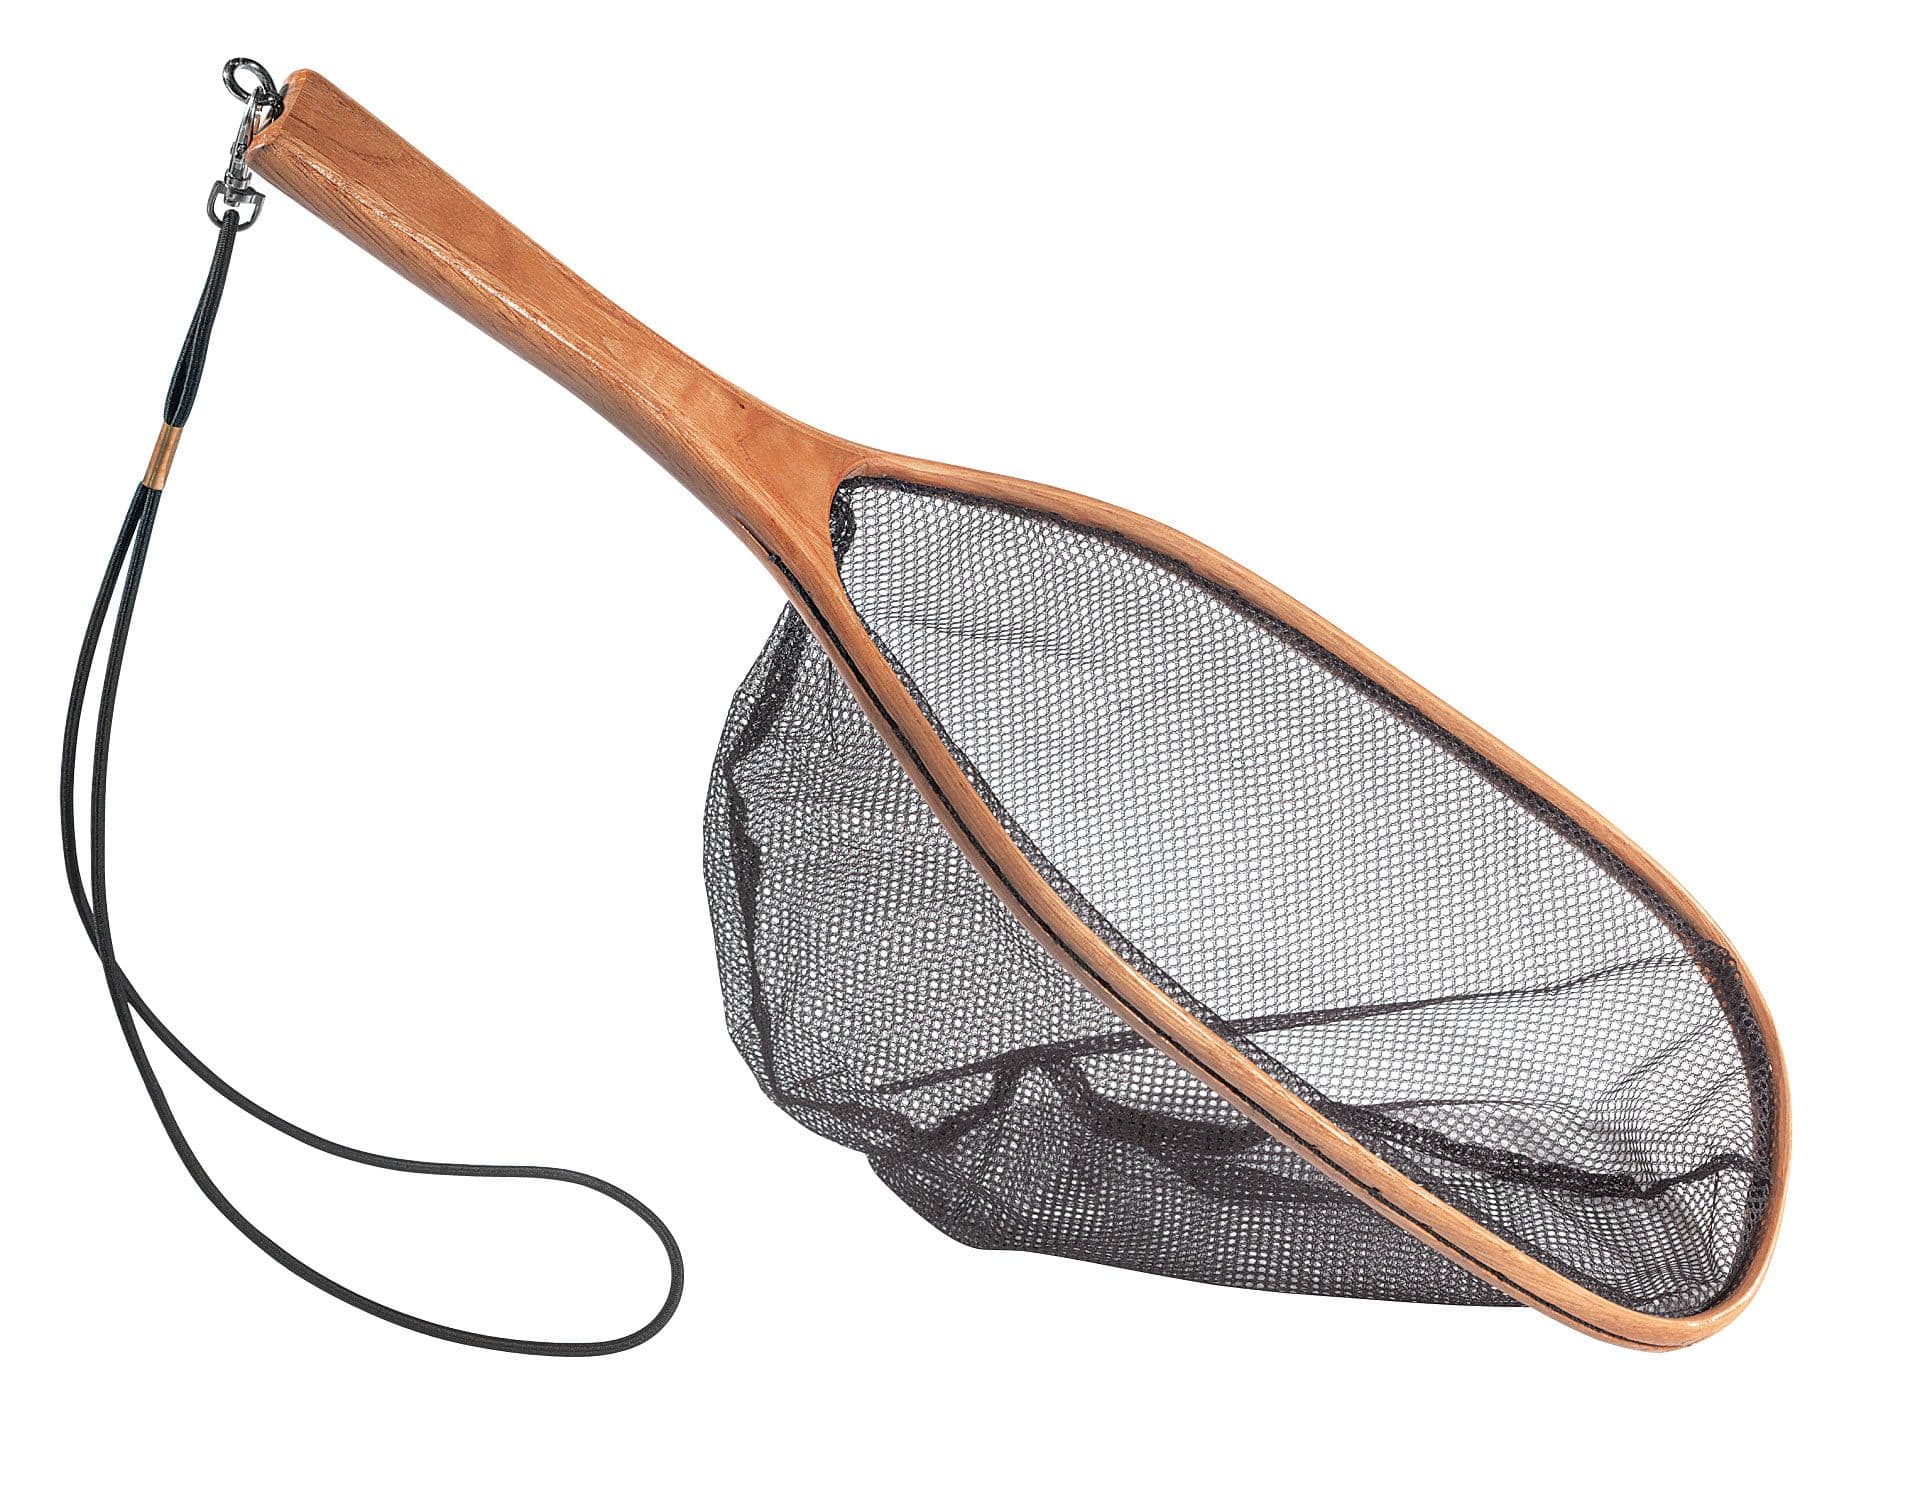 https://media-www.canadiantire.ca/product/playing/fishing/fishing-accessories/0780226/trout-net-wood-b9f558ba-4841-4a3c-8d32-f60324dc0963-jpgrendition.jpg